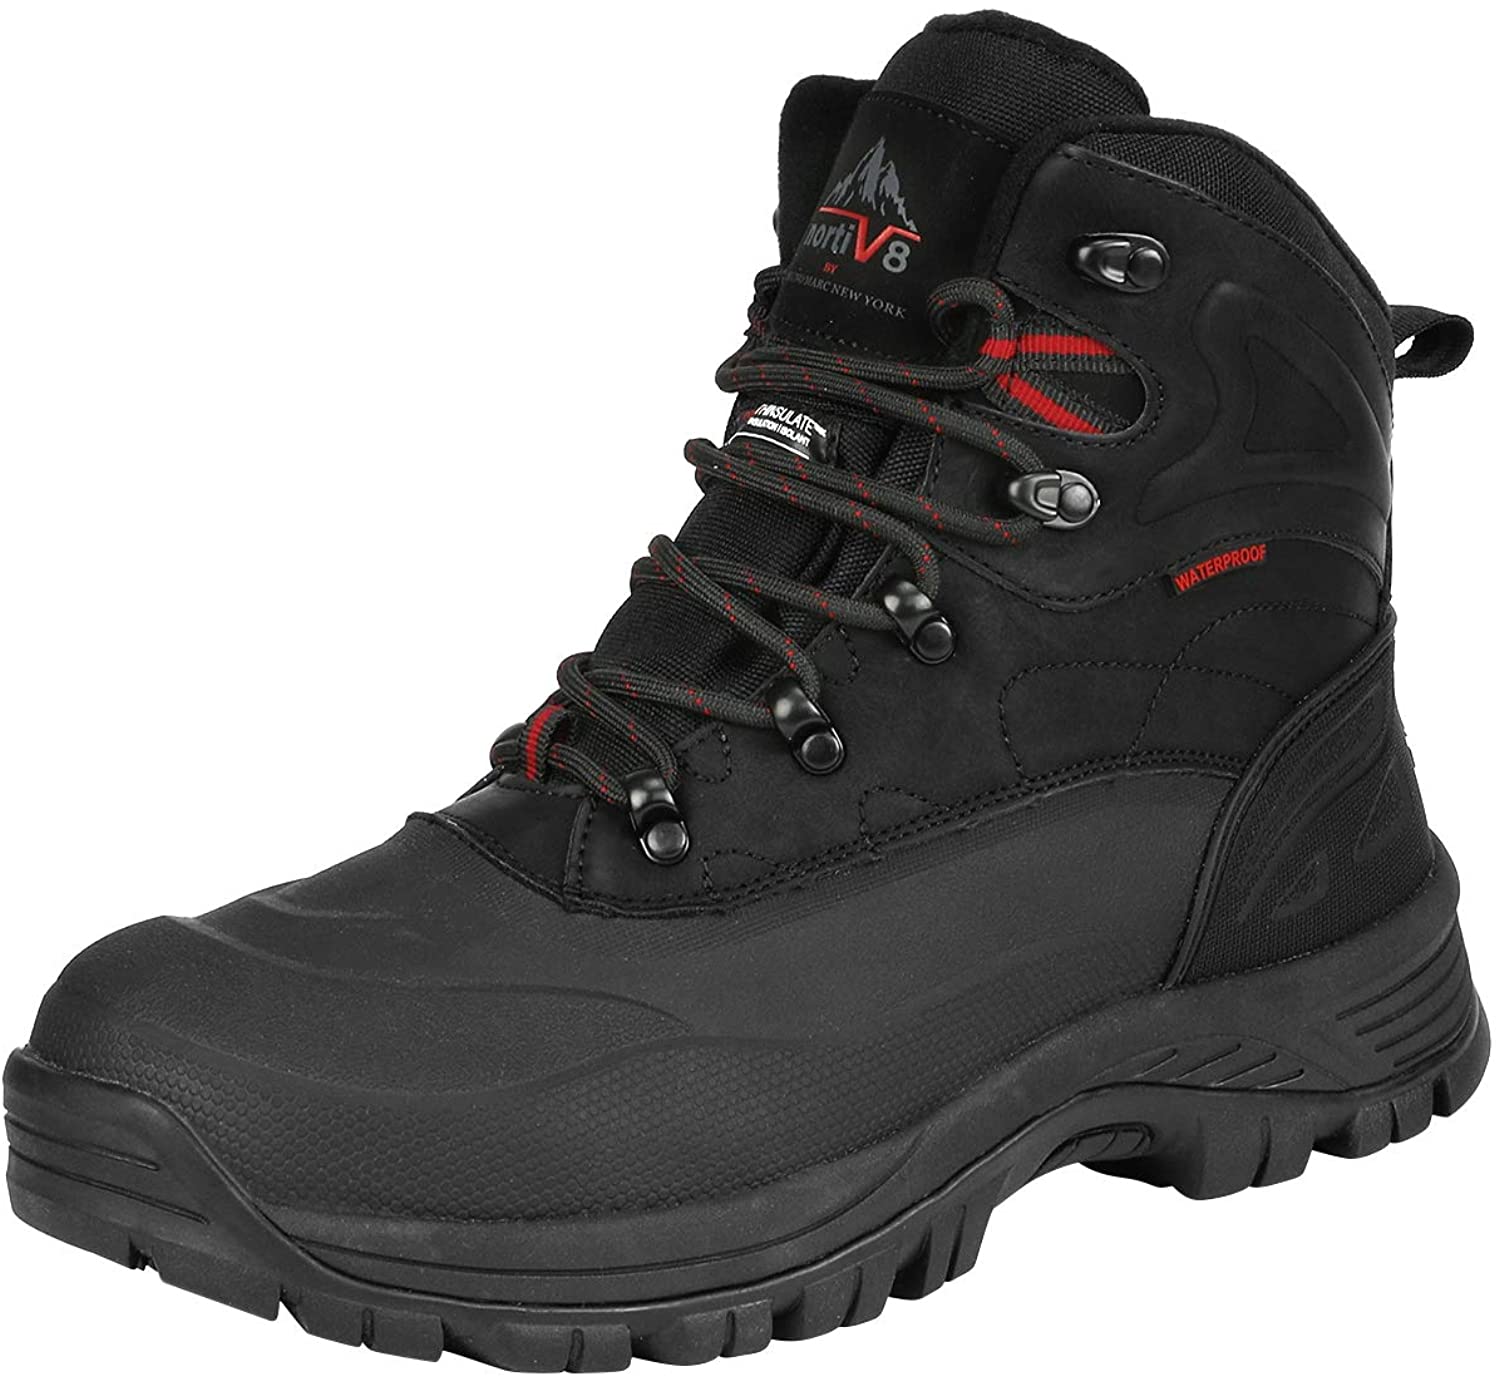 NORTIV 8 Men's Winter Snow Boots Insulated Waterproof Construction Hiking Shoes 160443-M Black Size 9.5 M US